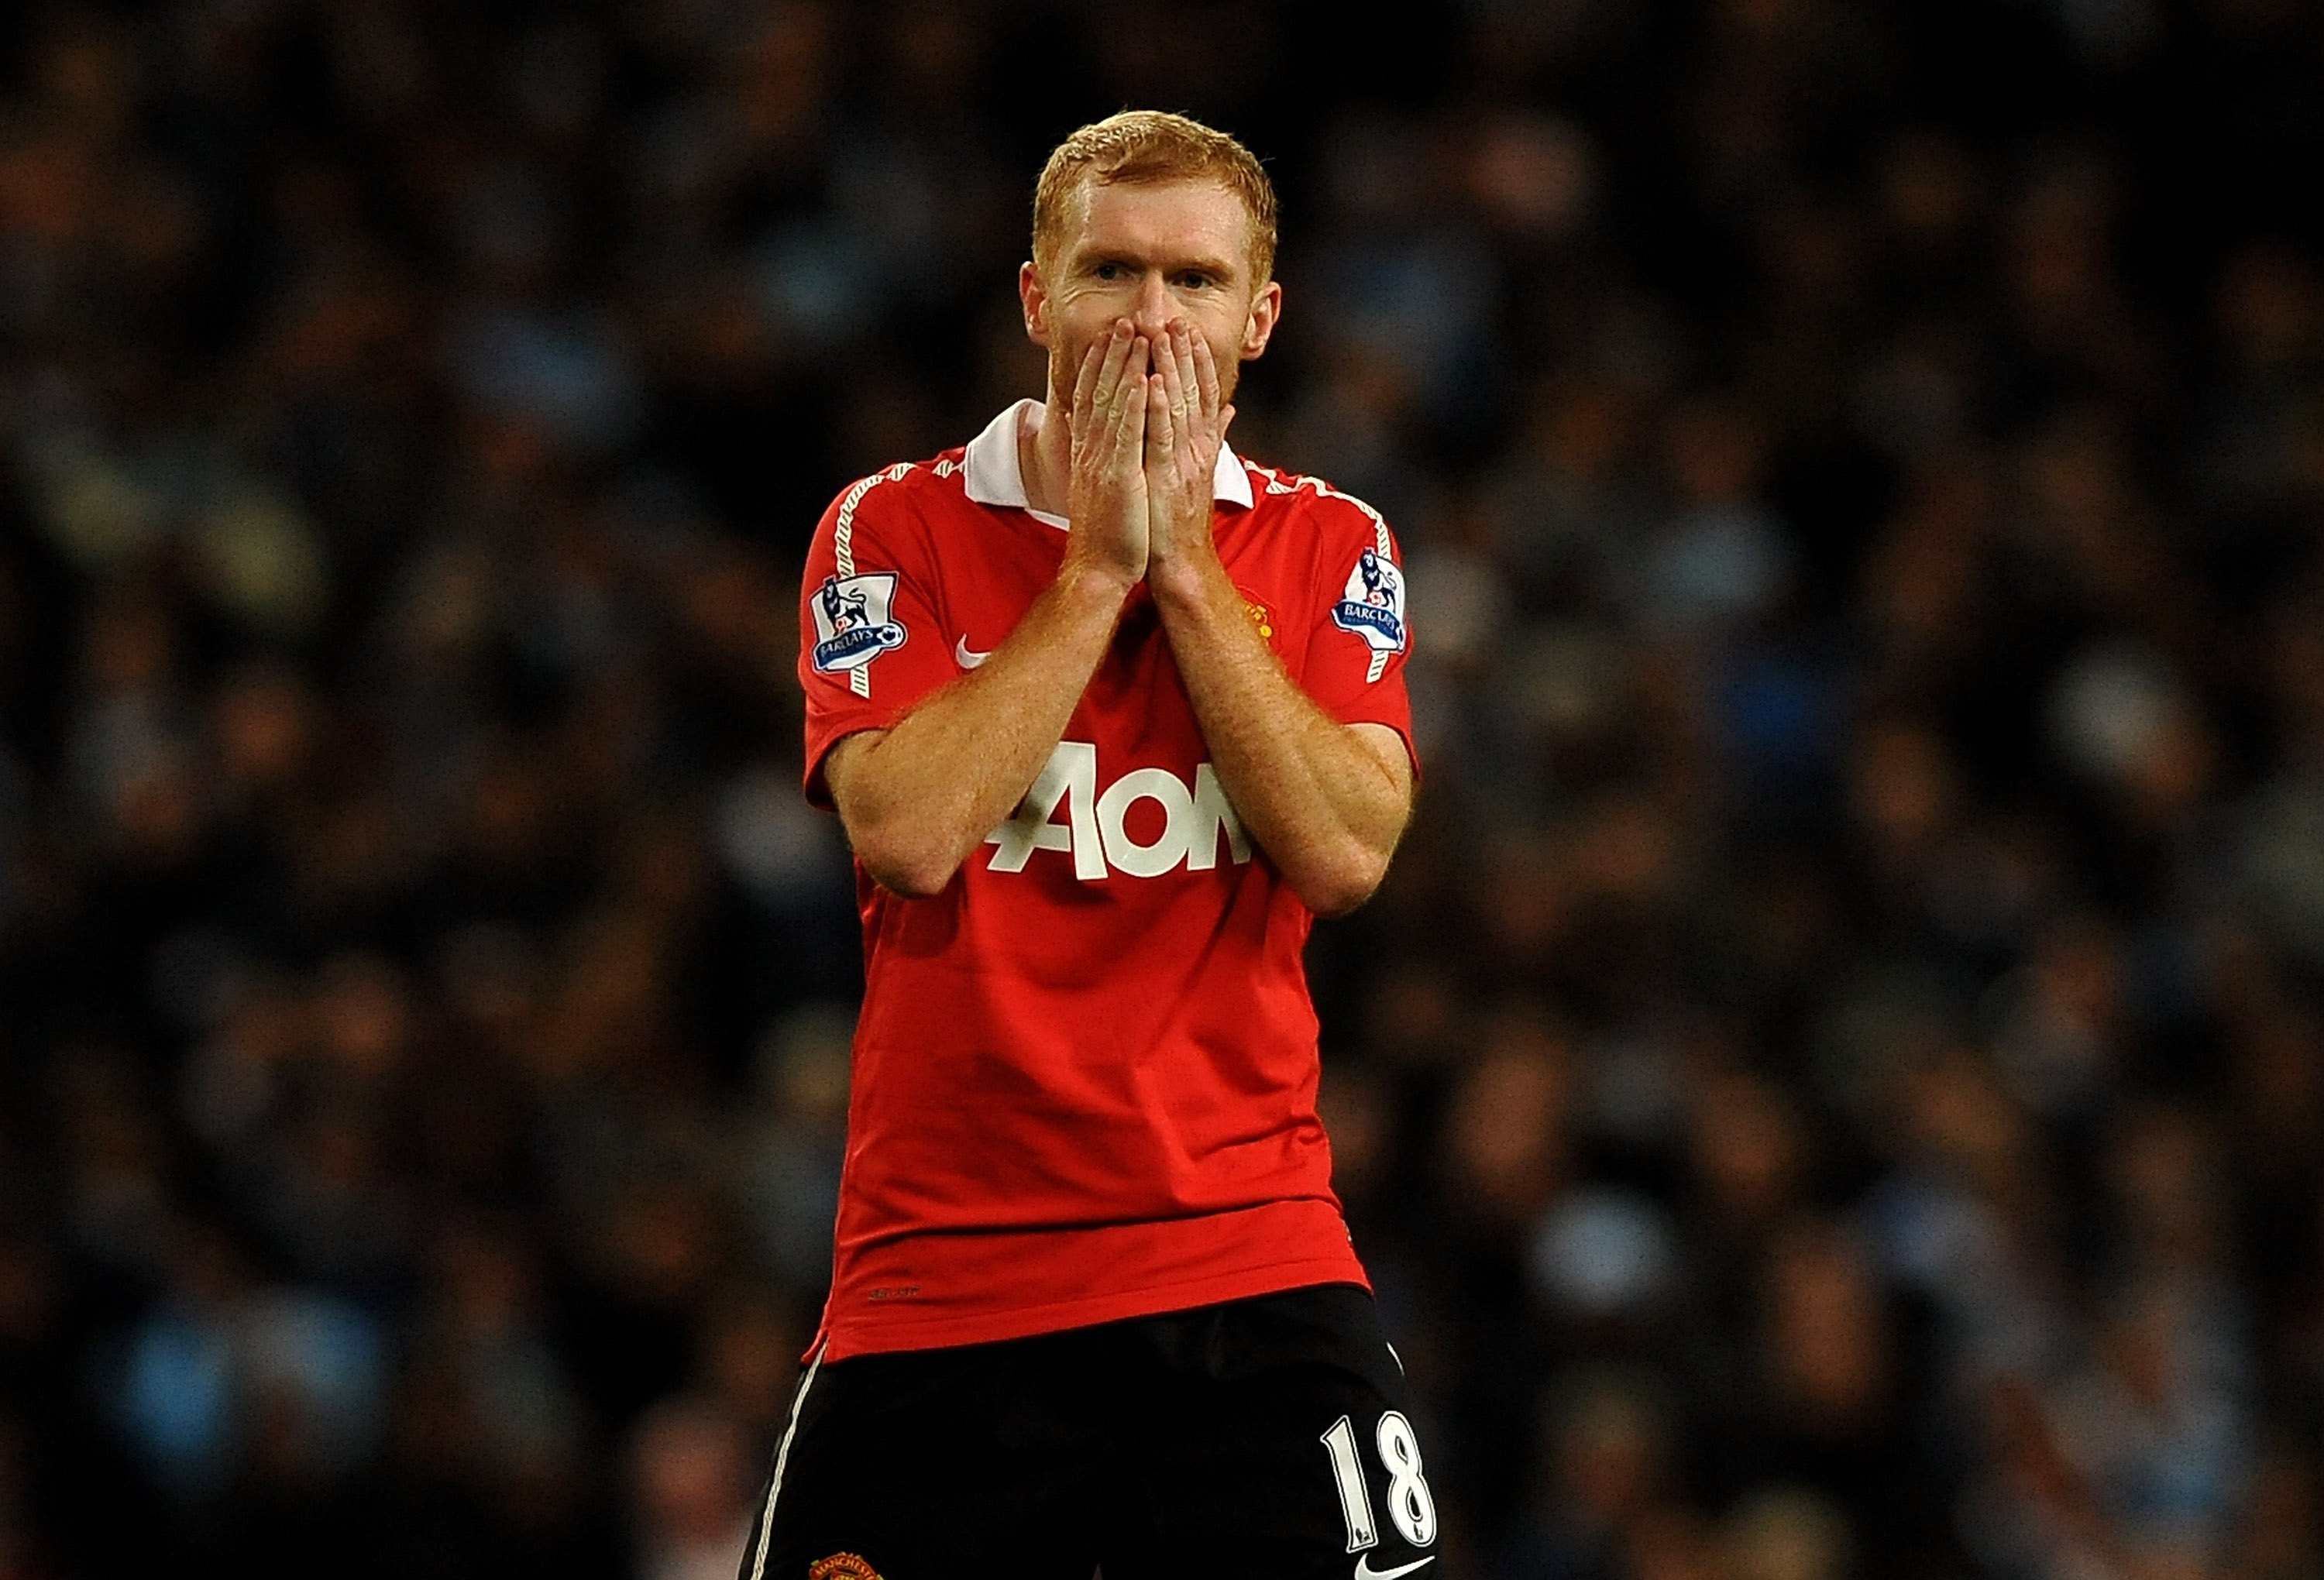 MANCHESTER, ENGLAND - NOVEMBER 10:  Paul Scholes of Manchester United reacts to a missed chance during the Barclays Premier League match between Manchester City and Manchester United at the City of Manchester Stadium on November 10, 2010 in Manchester, En